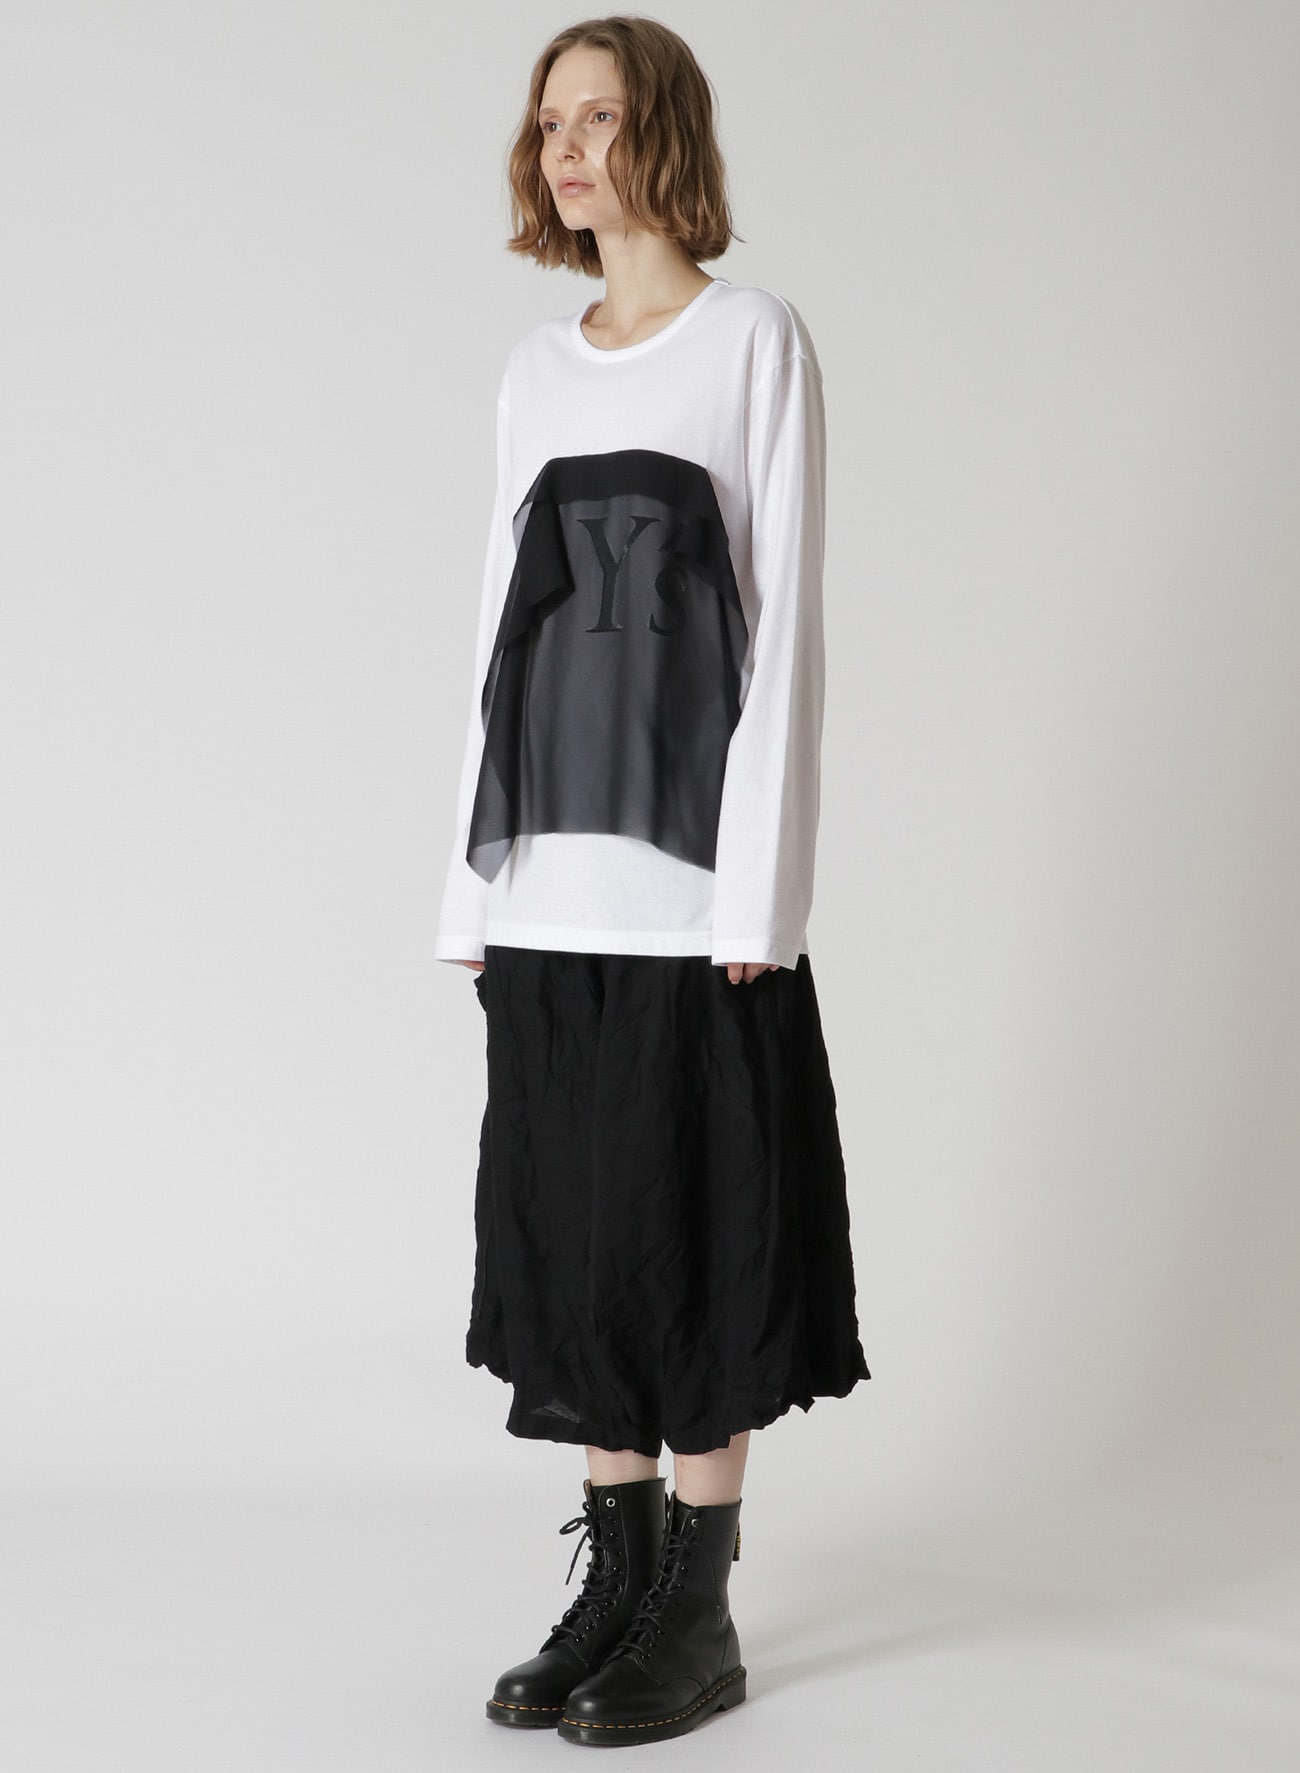 PLAIN STITCH x GEORGETTE Y's PATCH-WORKED LONG SLEEVES T